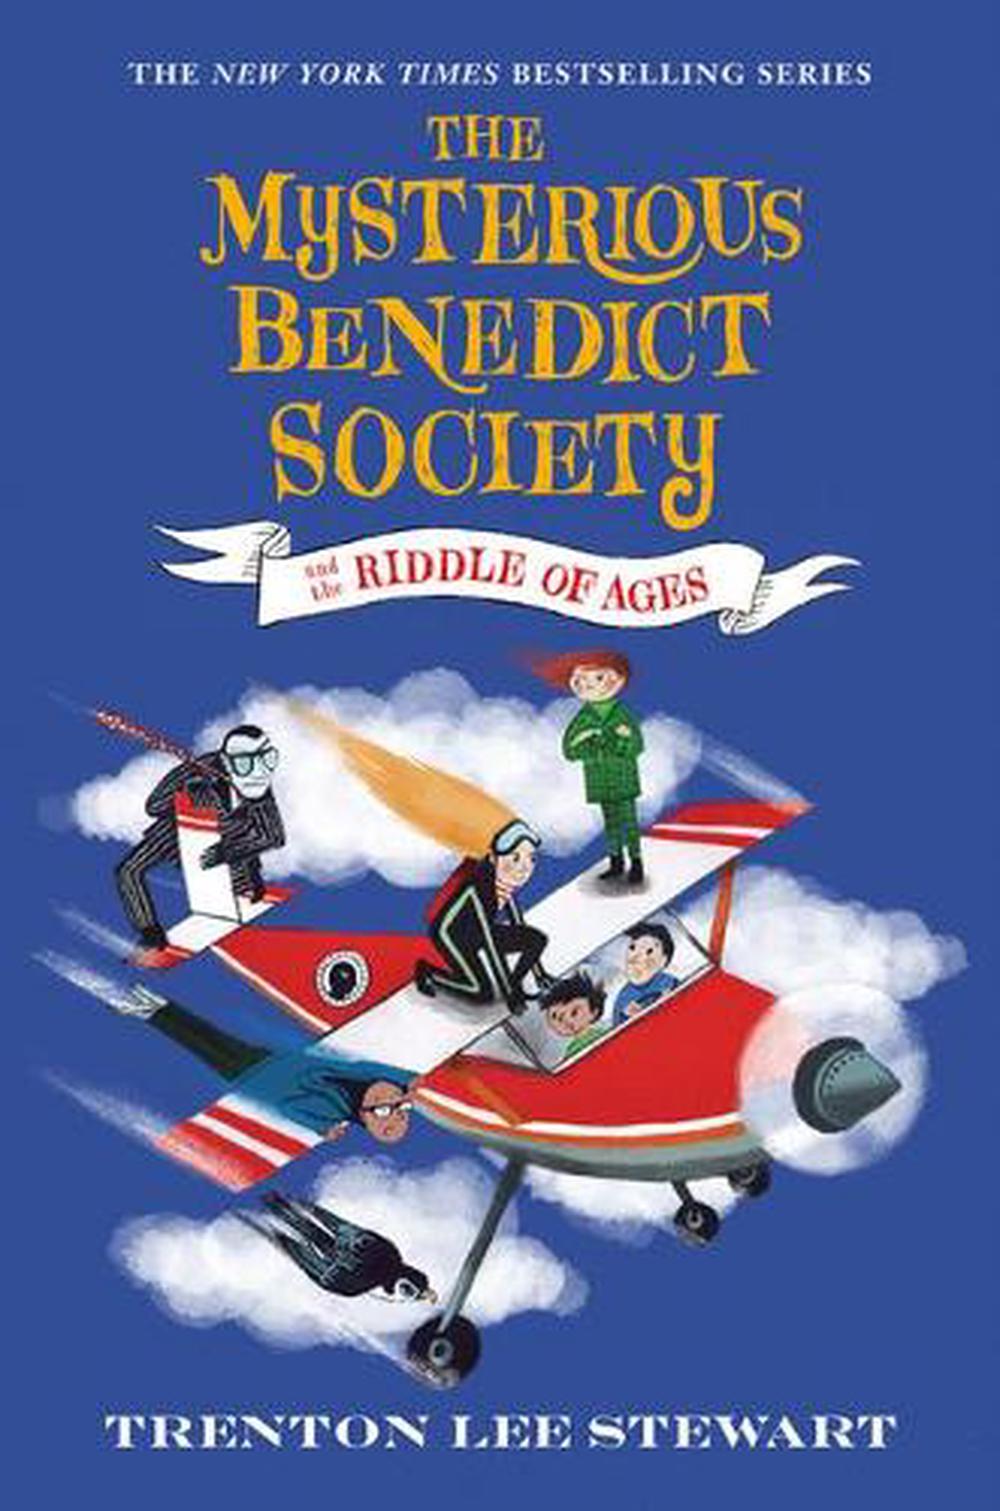 the mysterious benedict society book 3